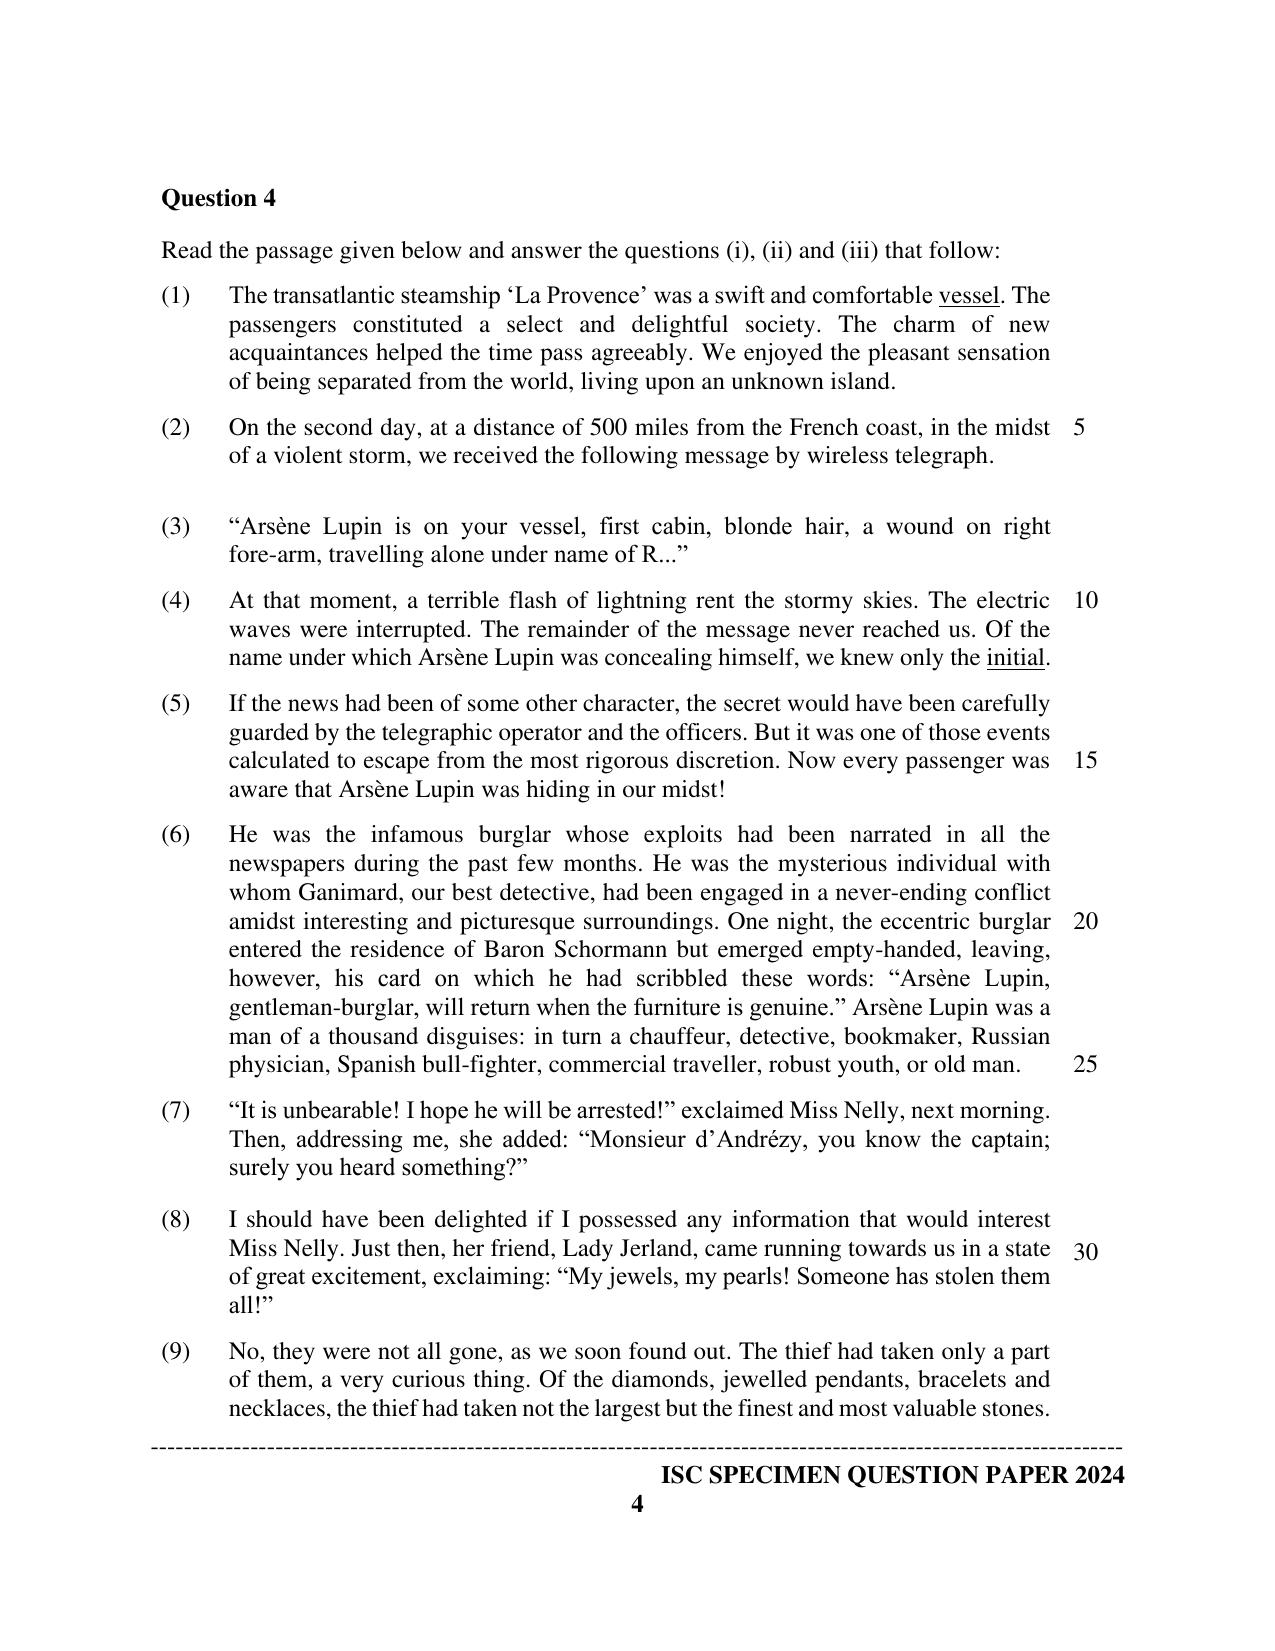 ISC Class 12 2024 English Paper 1 (Language) Sample Paper - Page 4